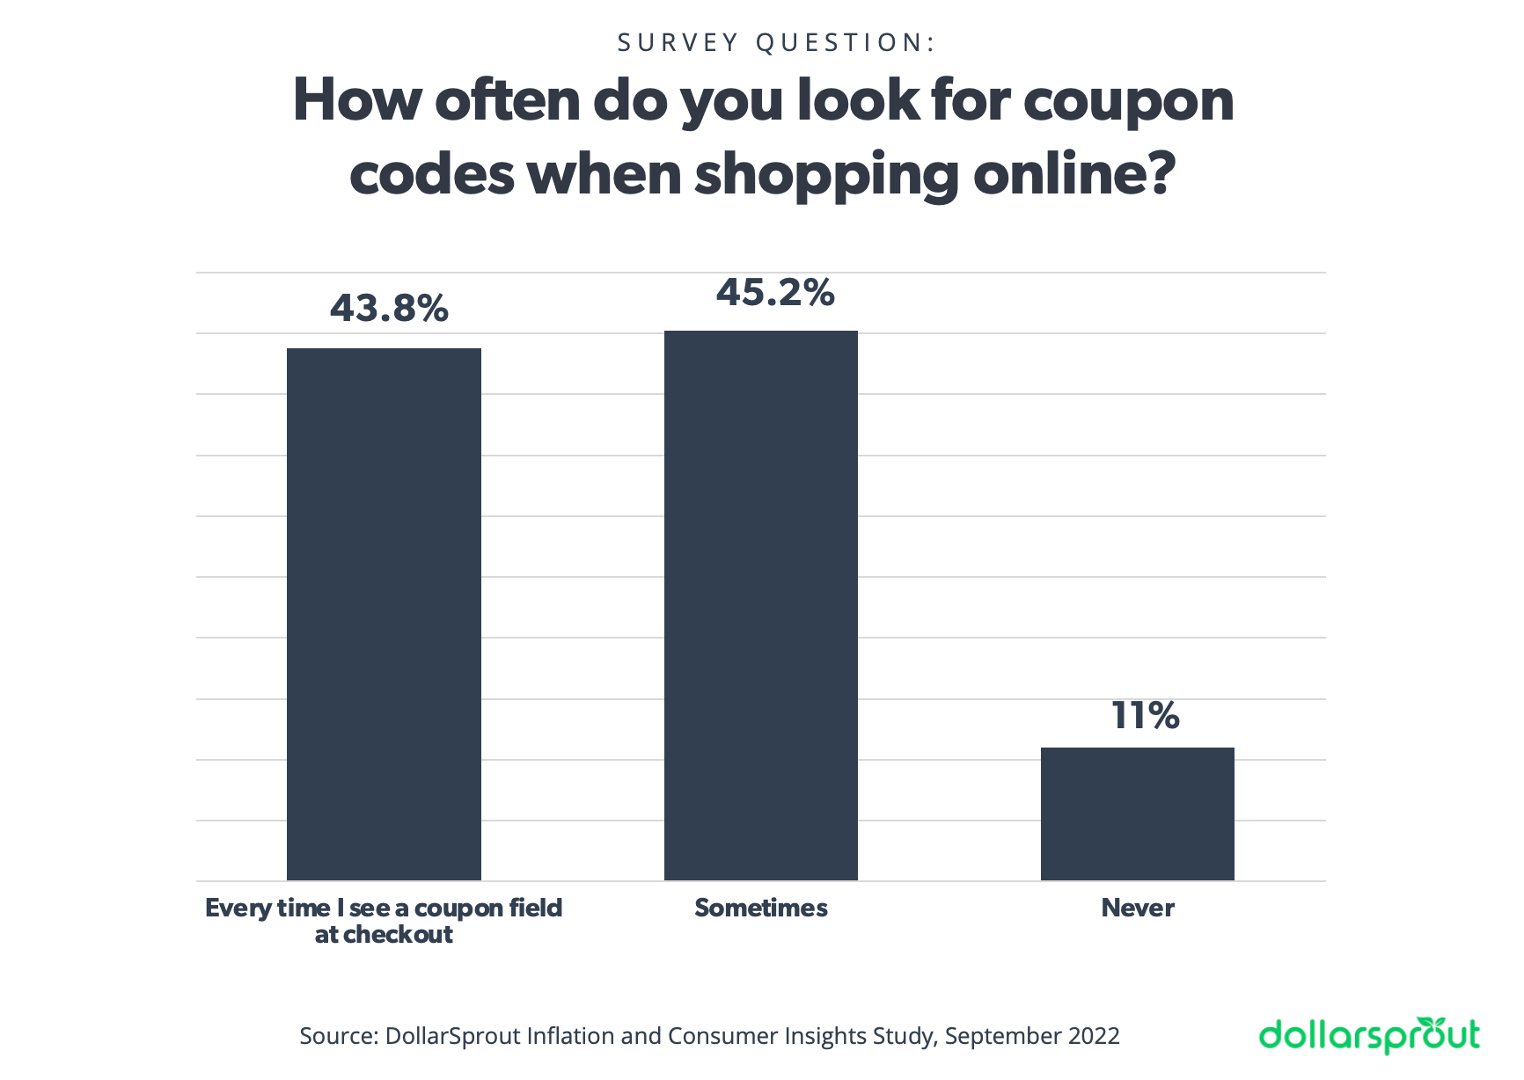 How often do you look for coupon codes when shopping online?  Most responded Sometimes or never.